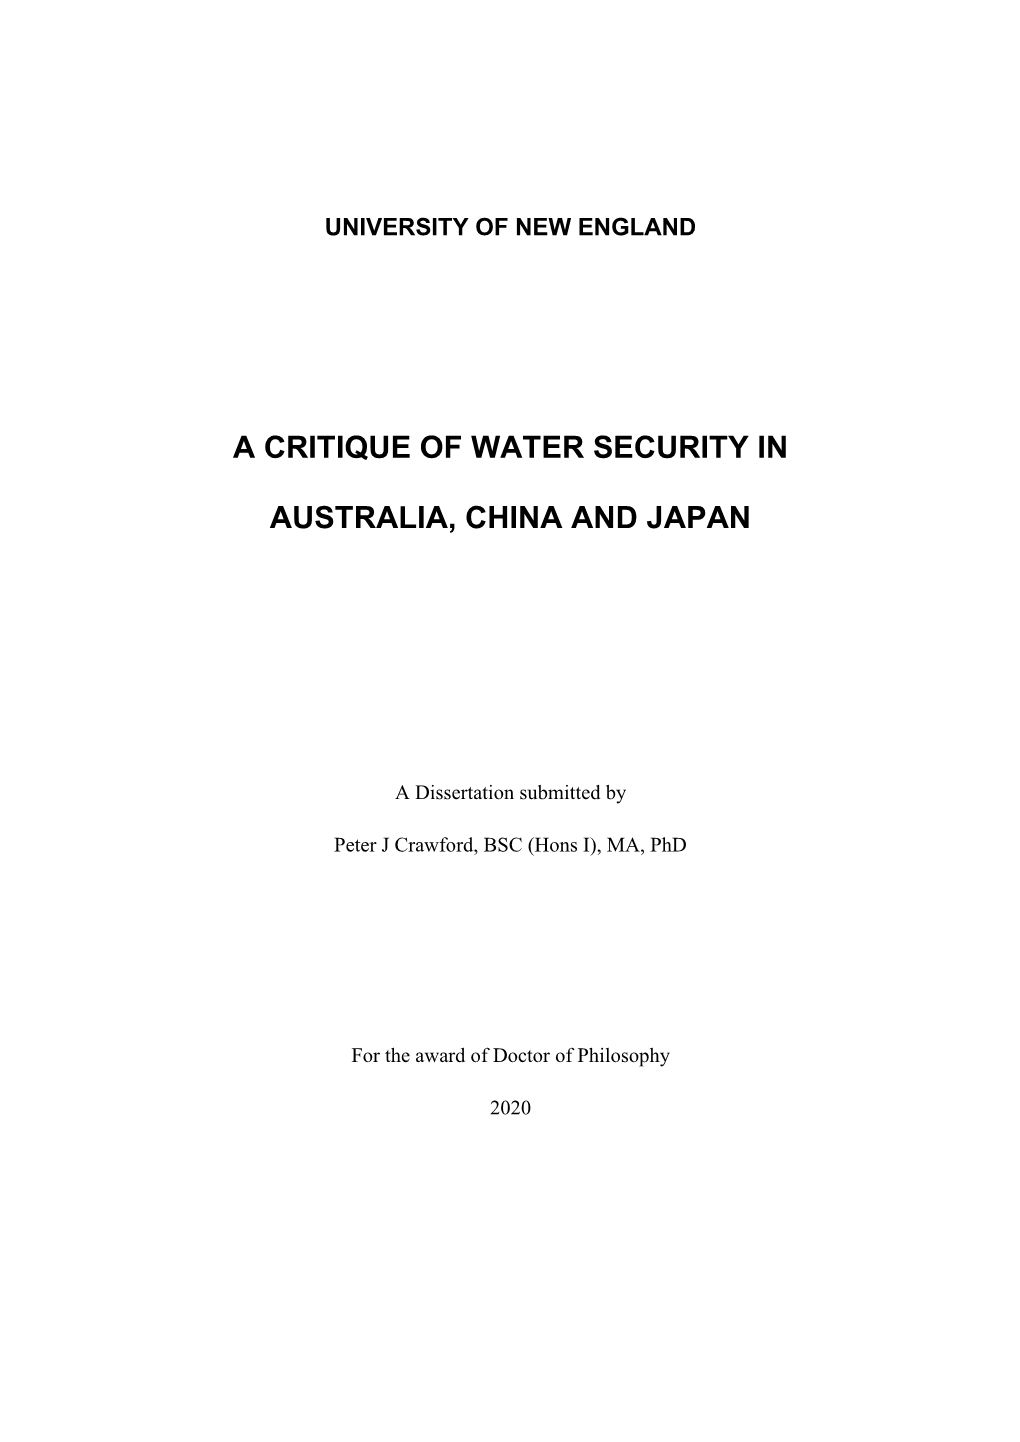 A Critique of Water Security in Australia, China and Japan